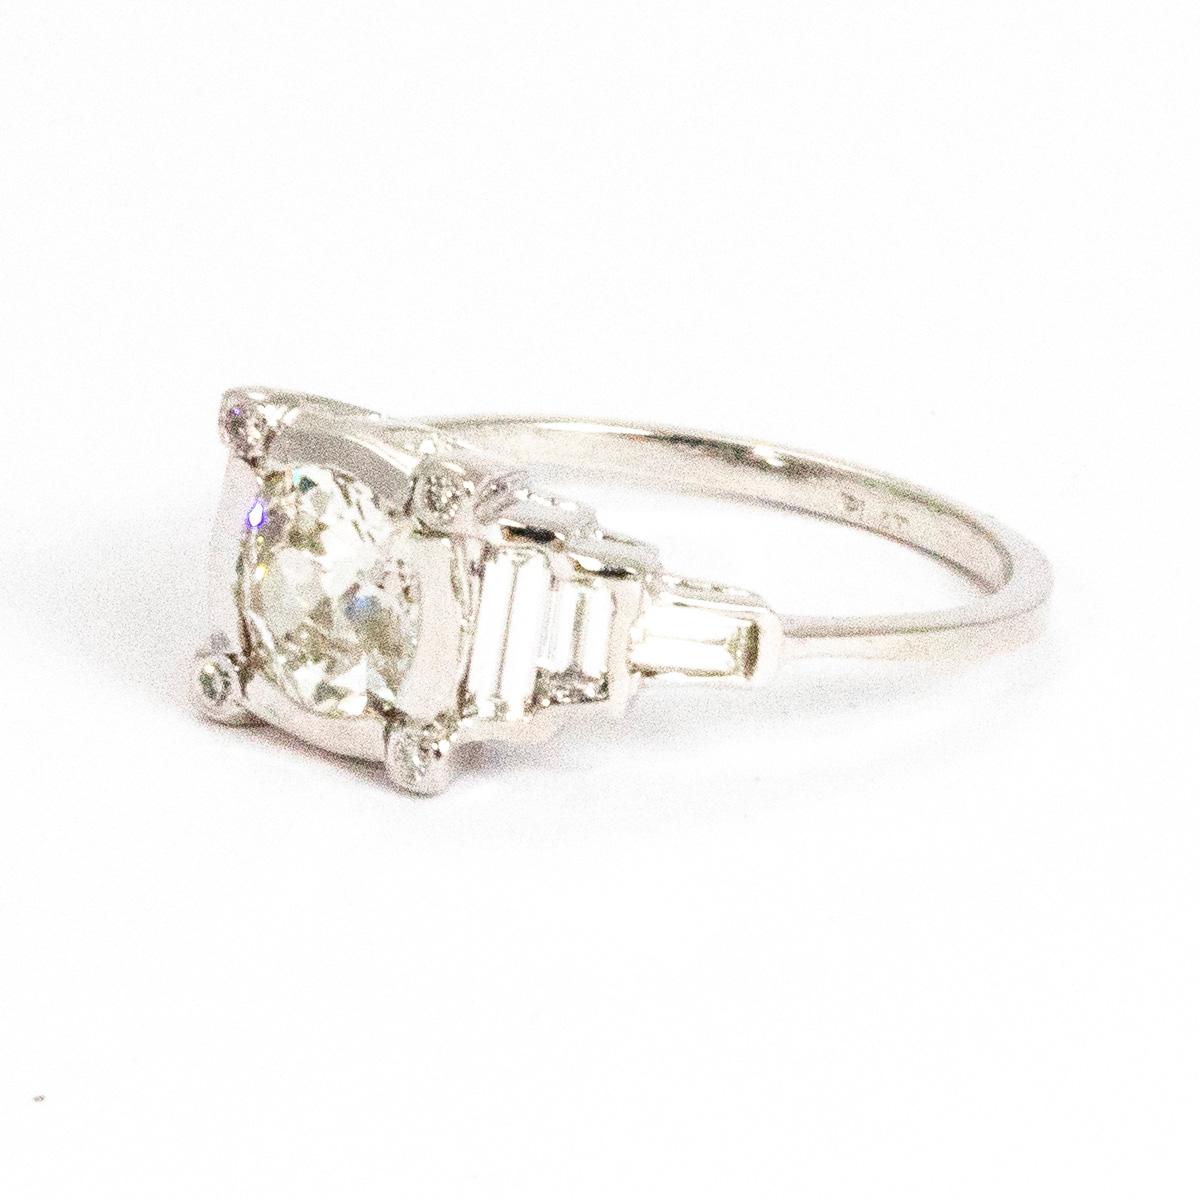 The gorgeous centre diamond measures 1.10ct and is old mine cut. Around the diamond in each corner of the square shaped setting sits a diamond point. This ring has an Art Deco style reflected in the horizontal baguette diamonds which create step